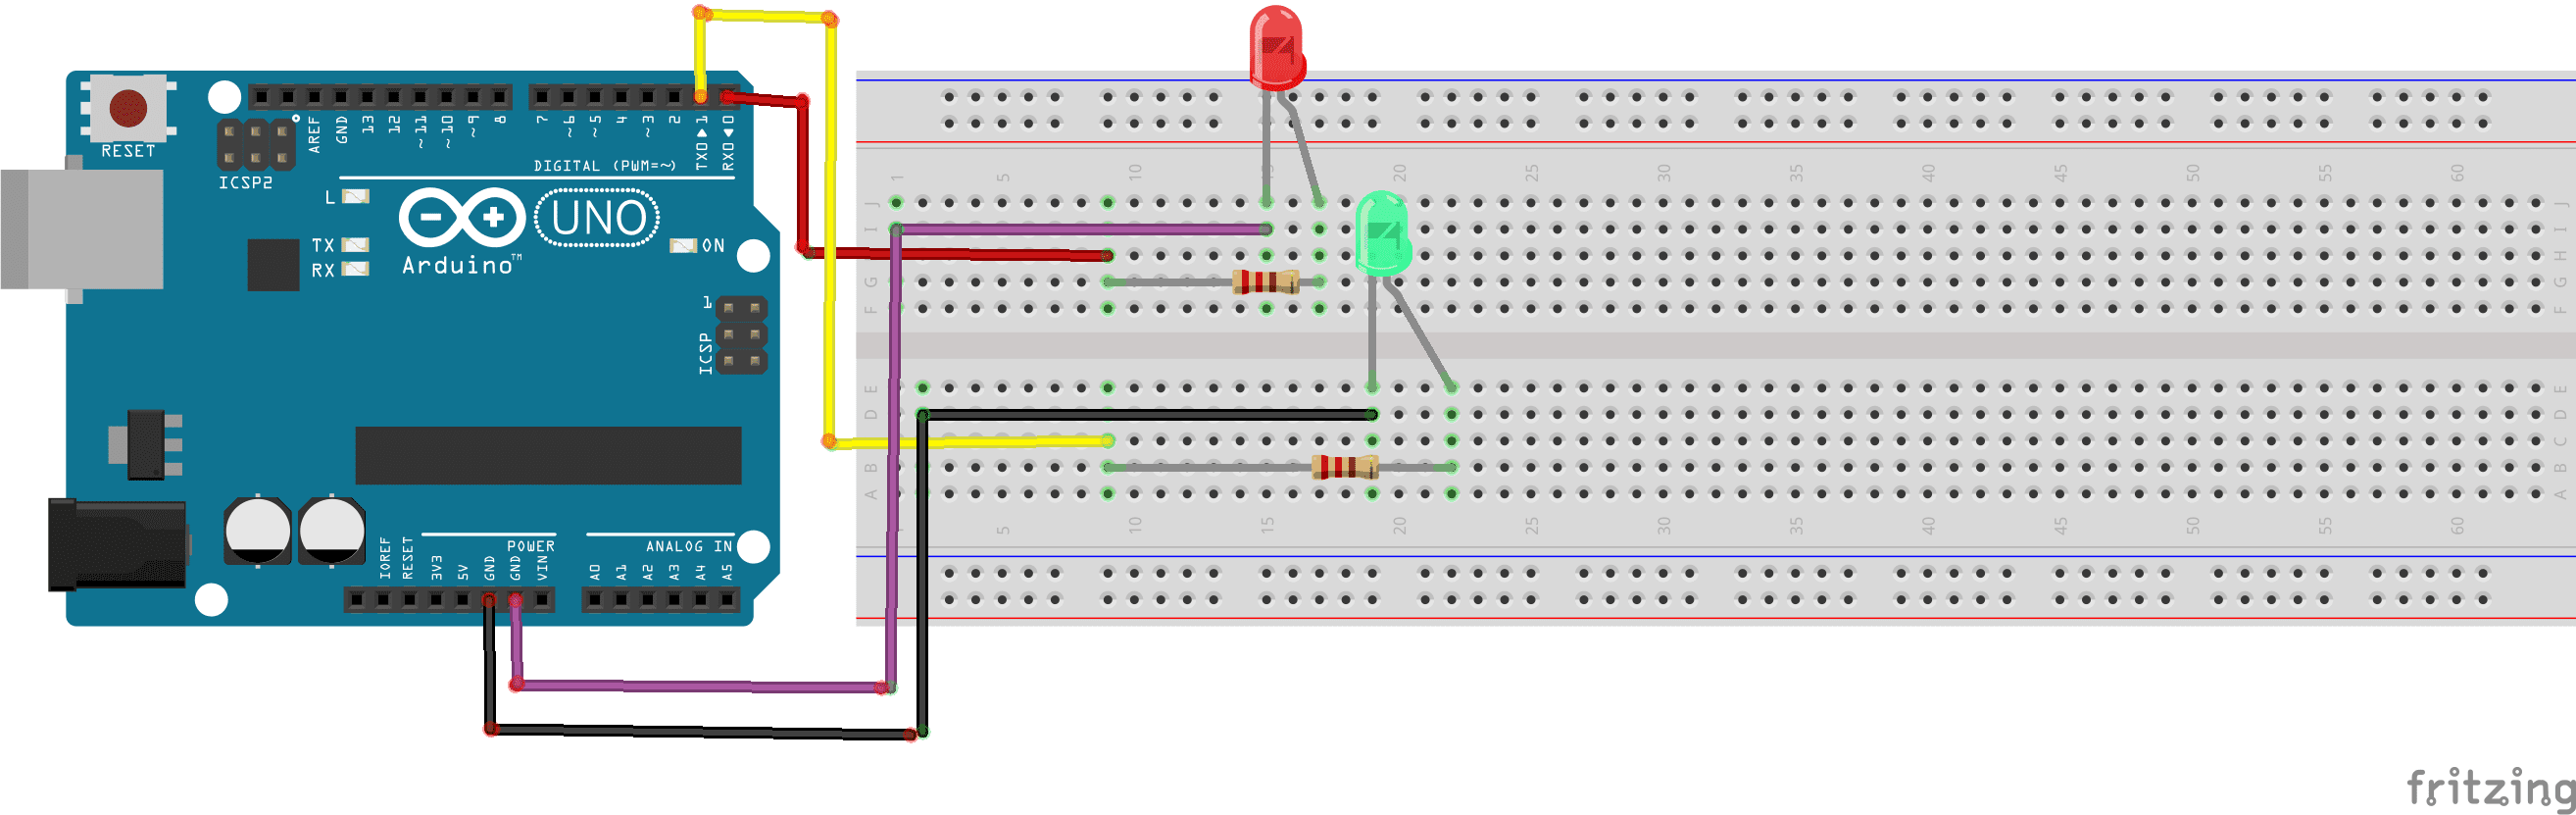 Getting Started with the Arduino - Controlling the LED (Part 2)